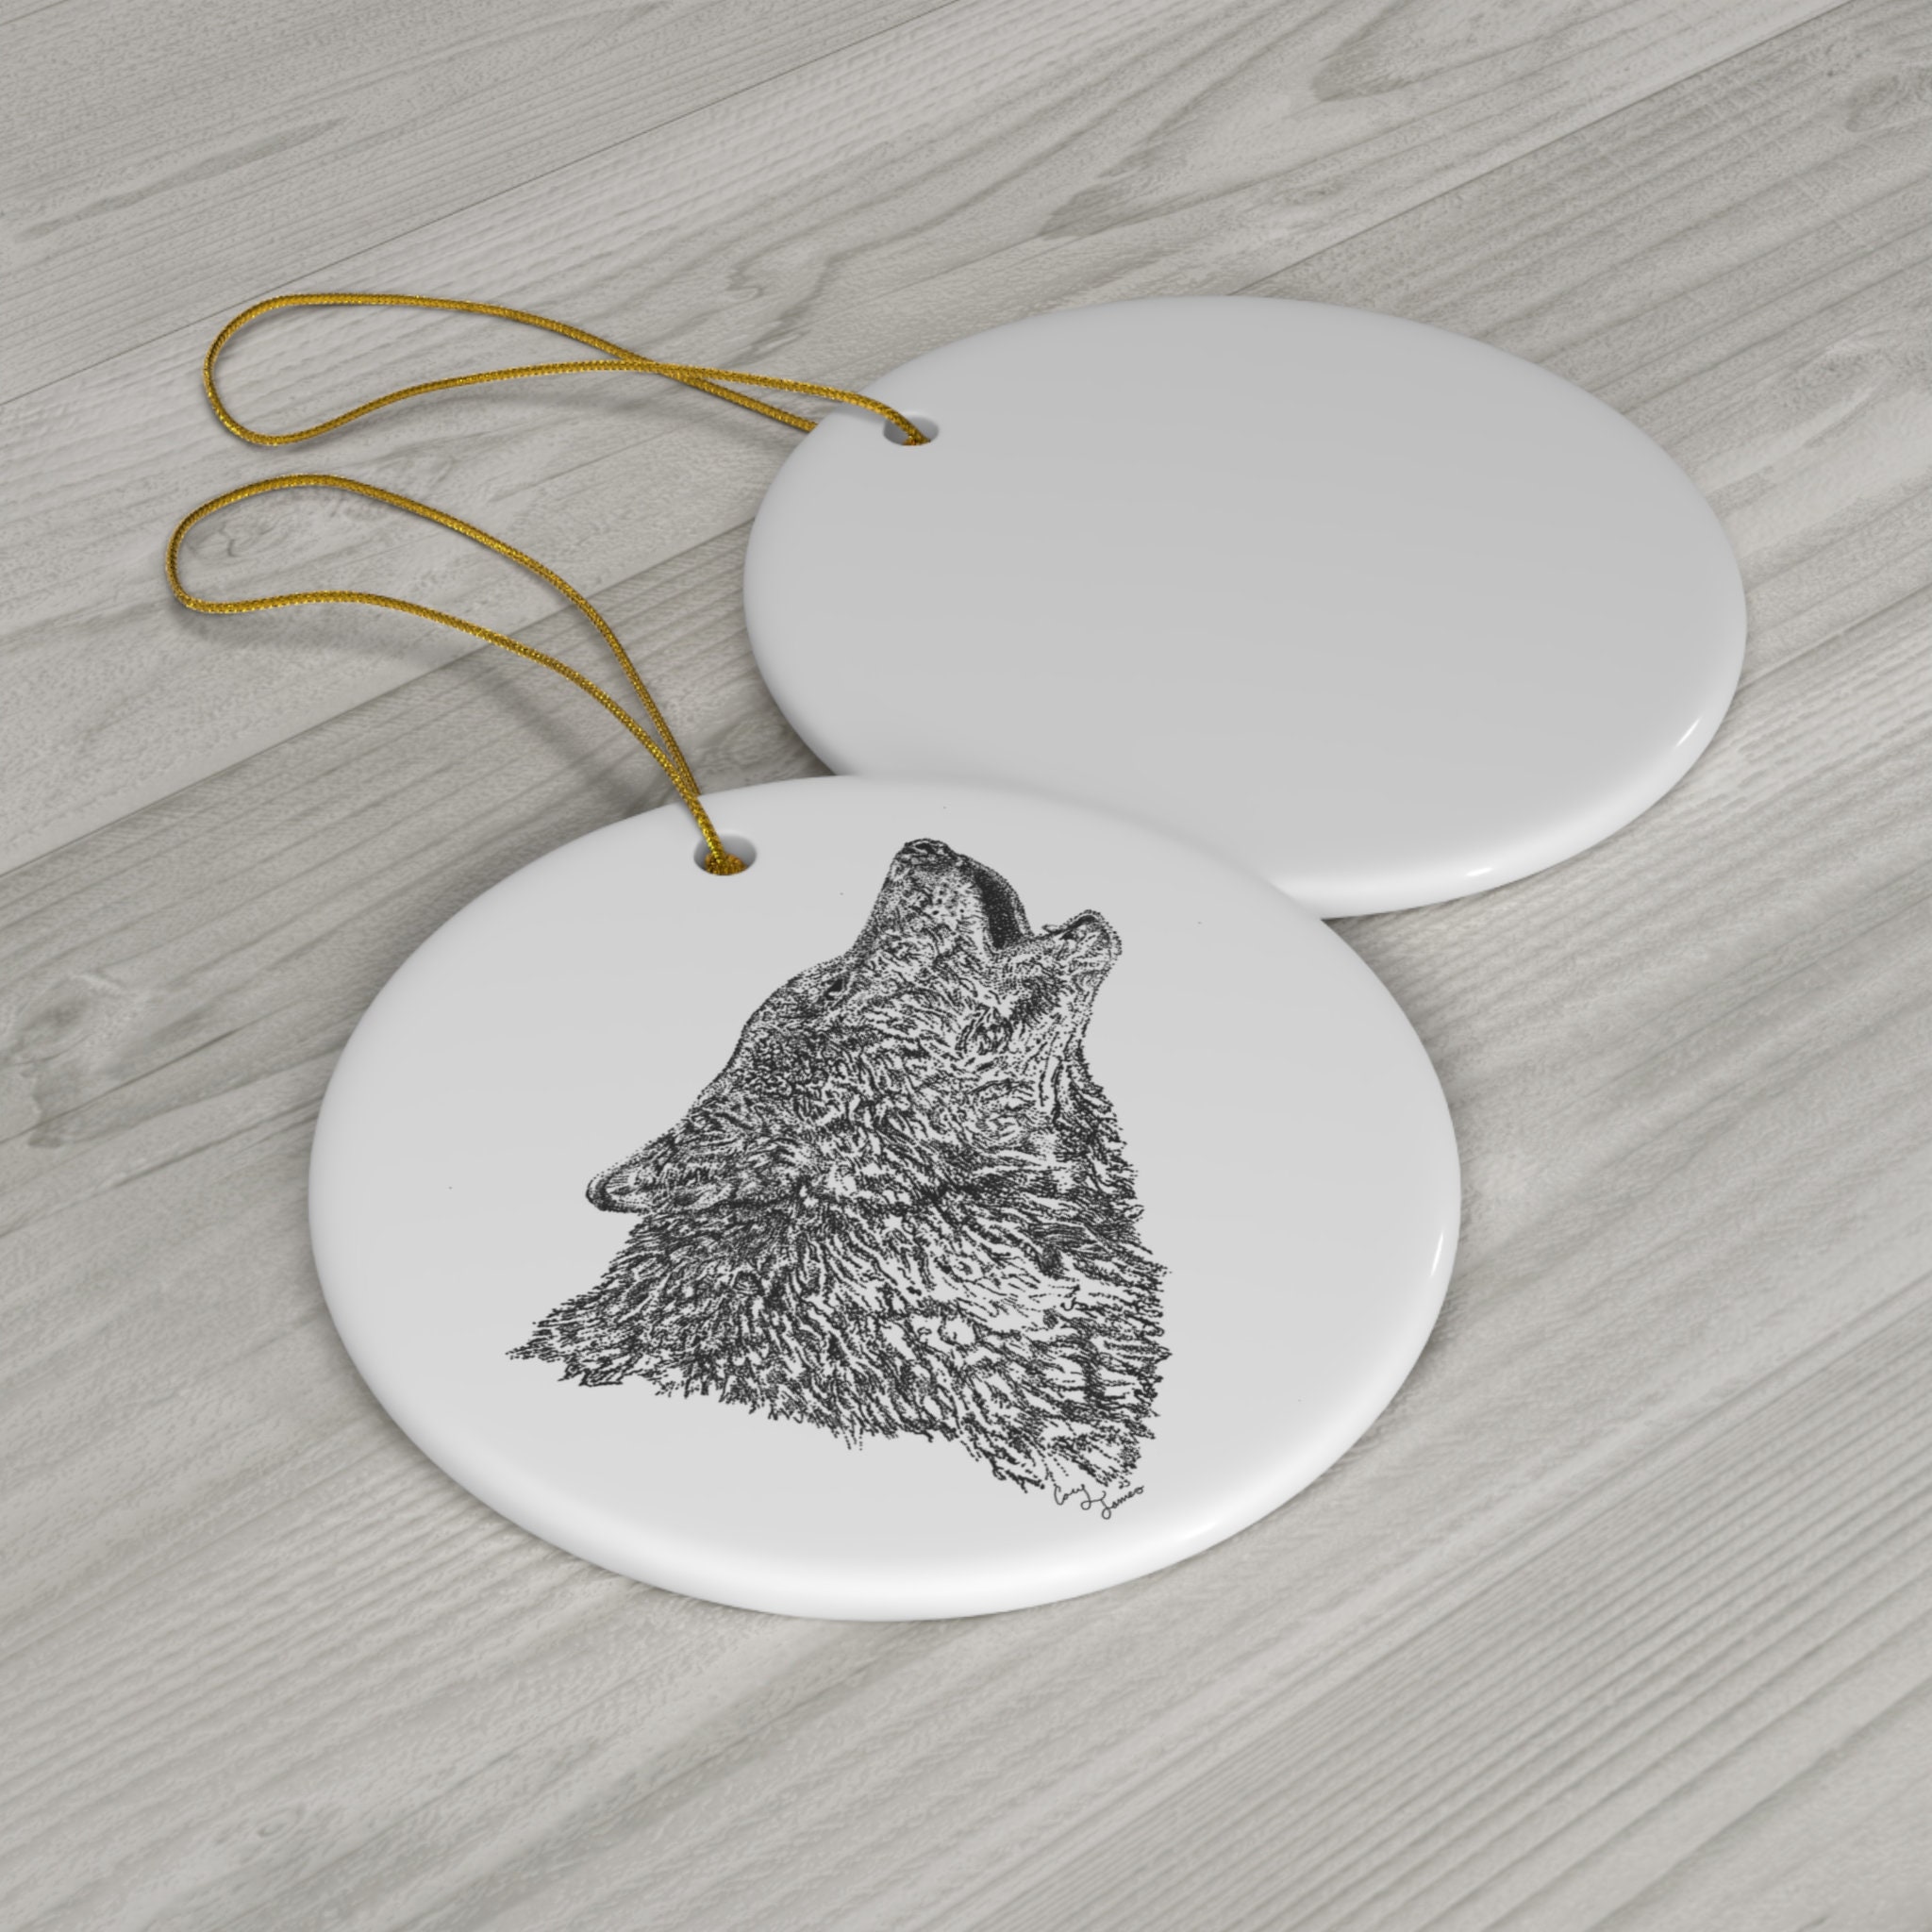 Discover Howling Wolf Ceramic Ornament, 1-Pack, Cabin country Christmas ornament -FREE SHIPPING